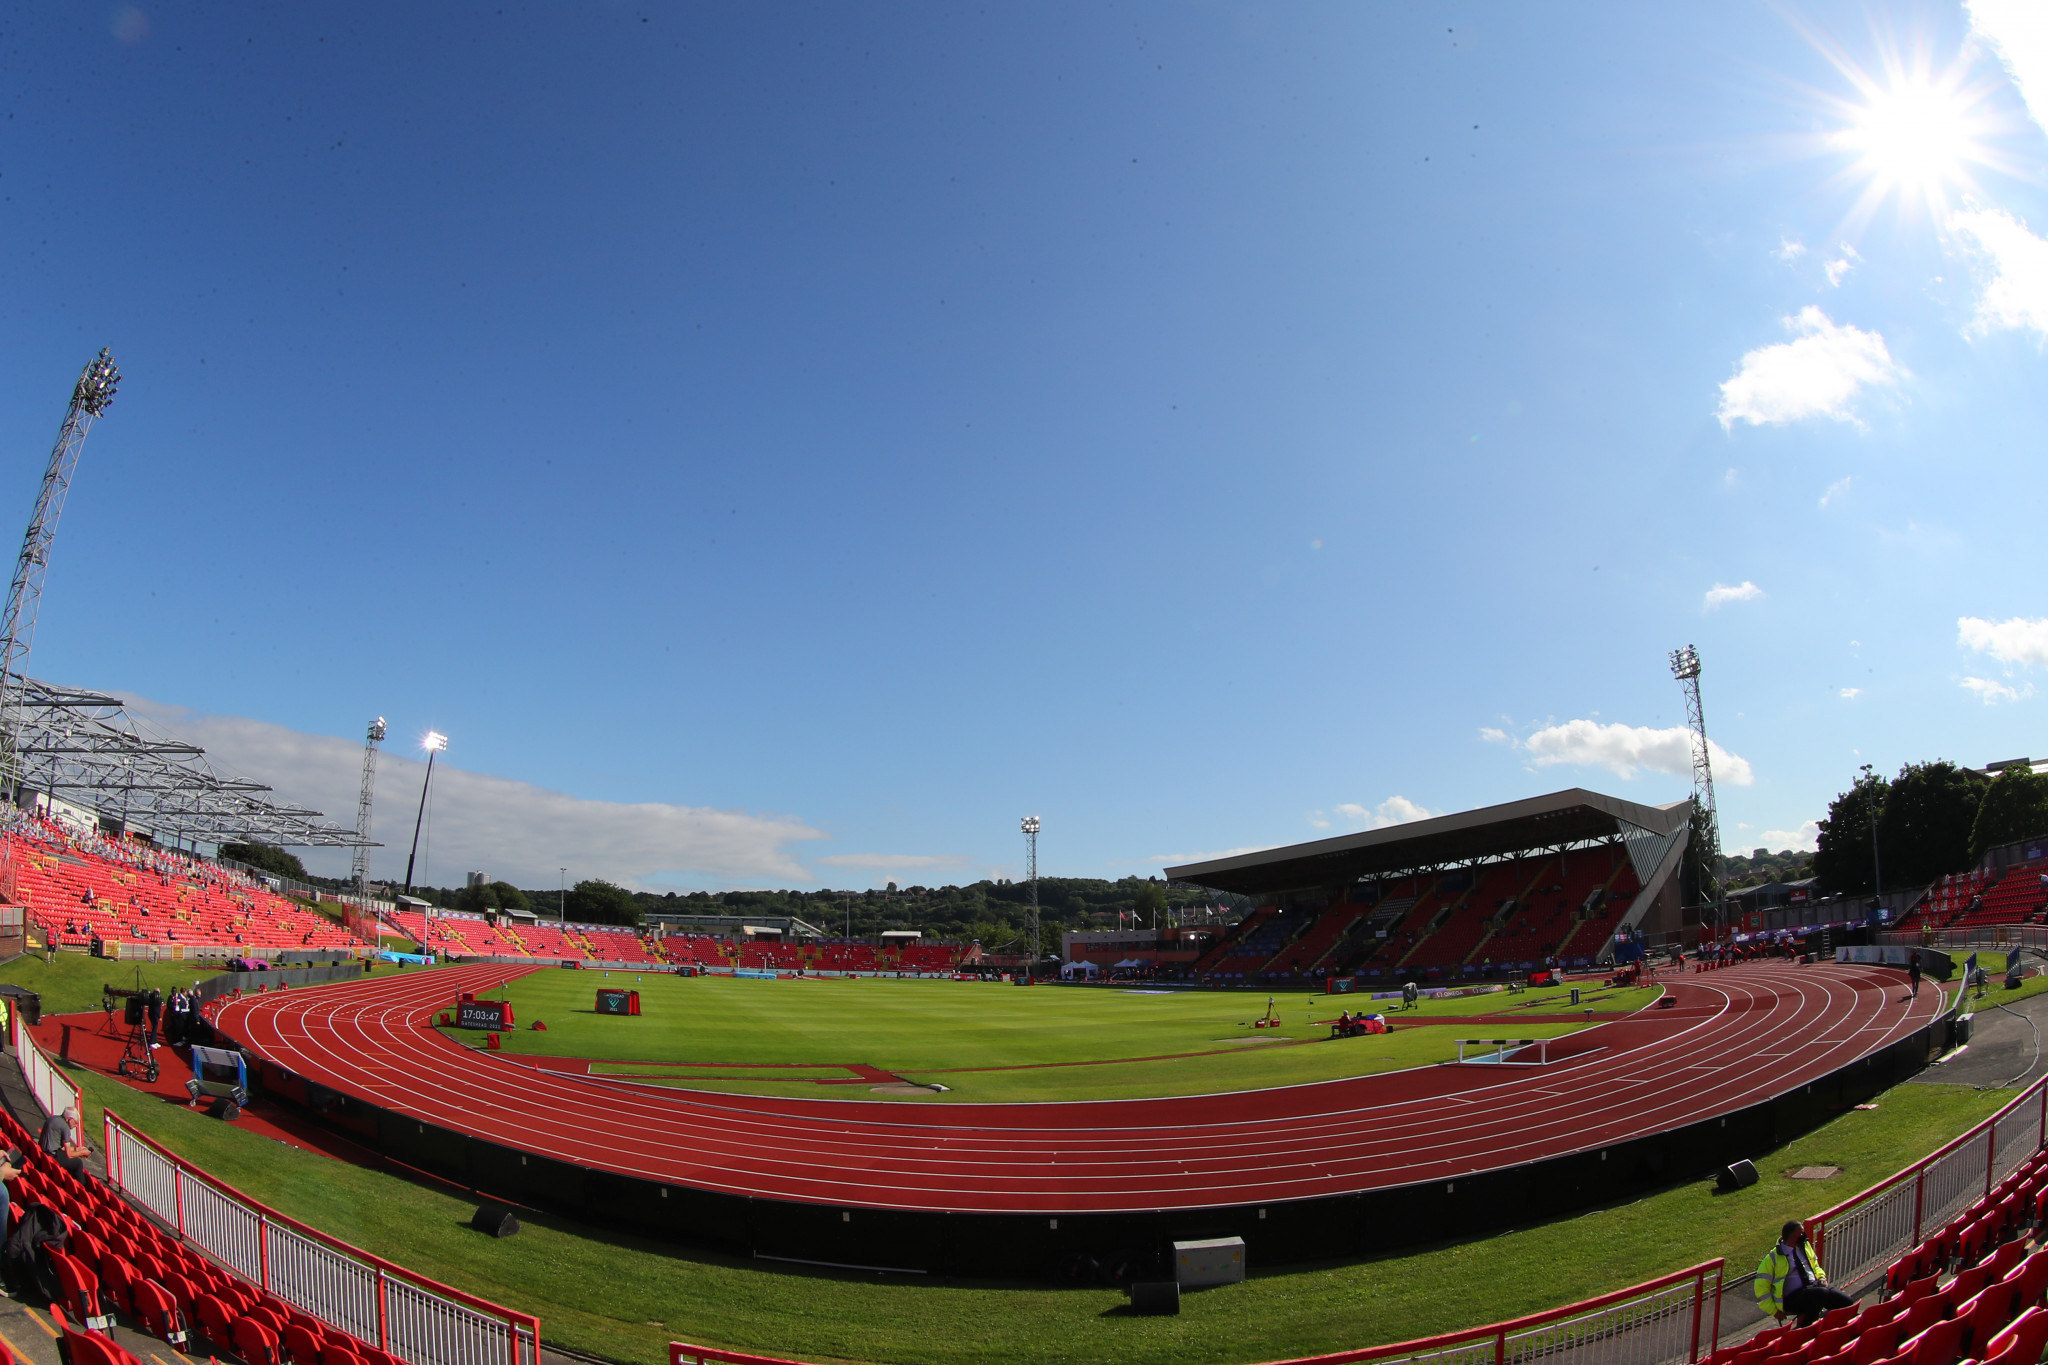 Gateshead bid for 2026 European Championships "dead in the water", Council leader claims